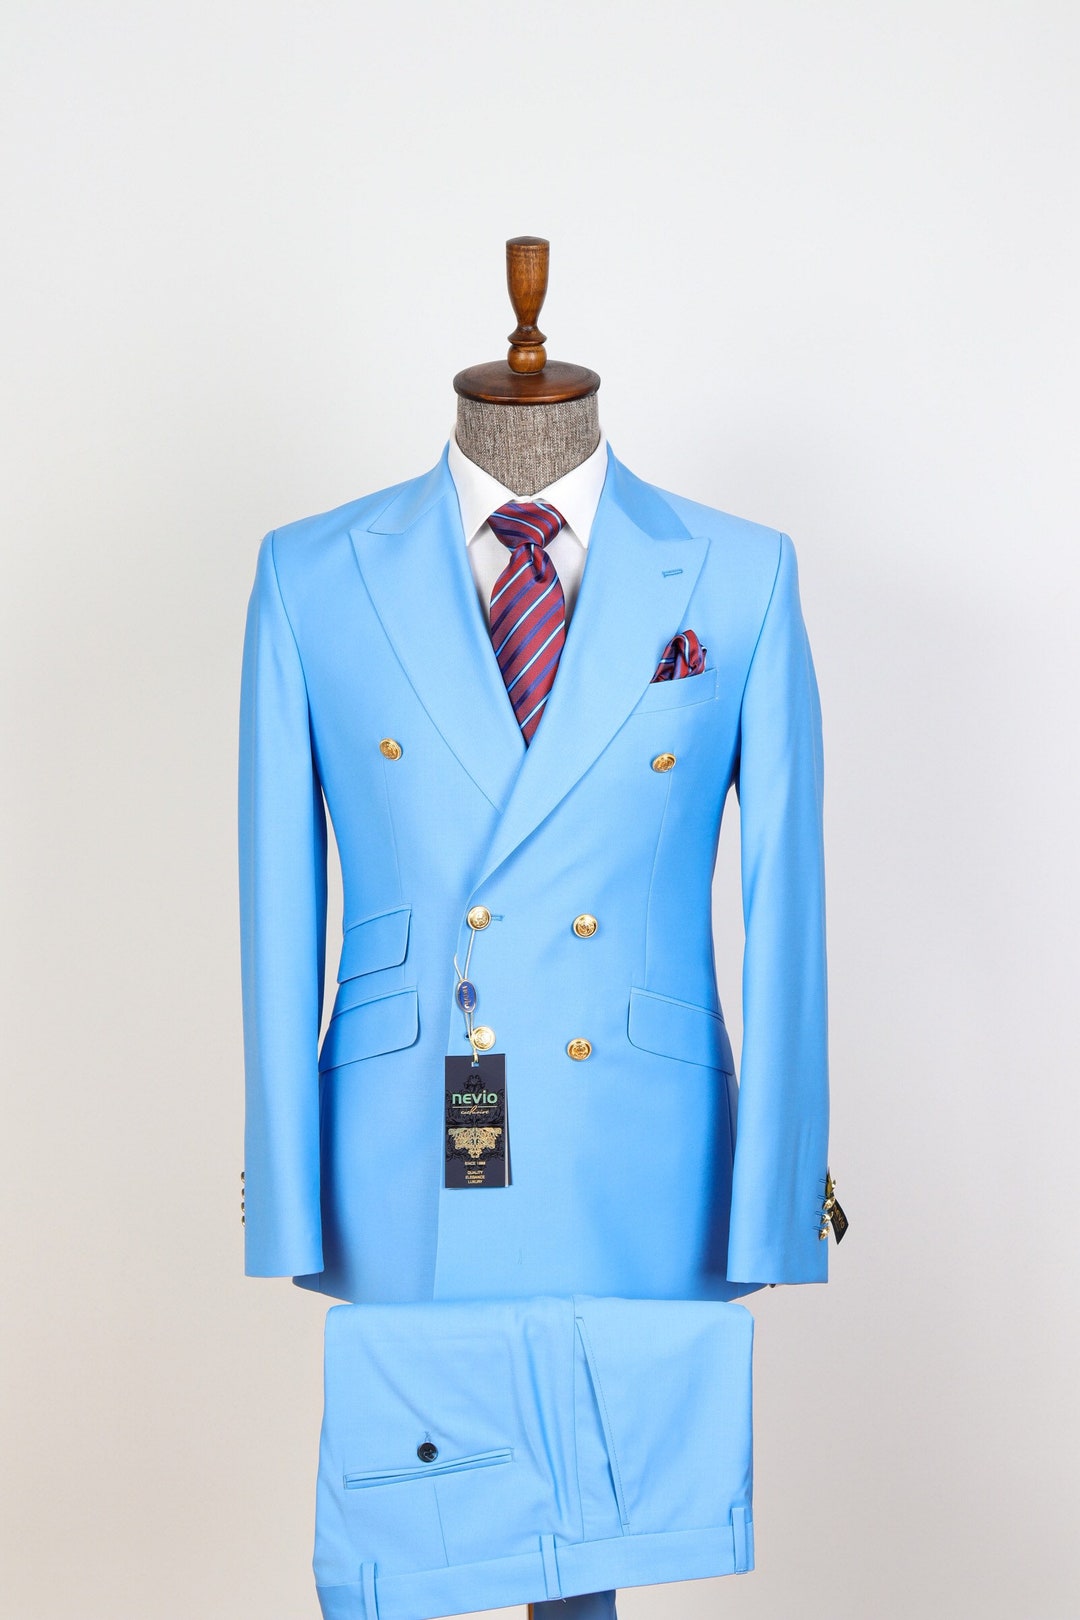 Double Breasted Sky Blue Golden Button Men's Suit - Etsy